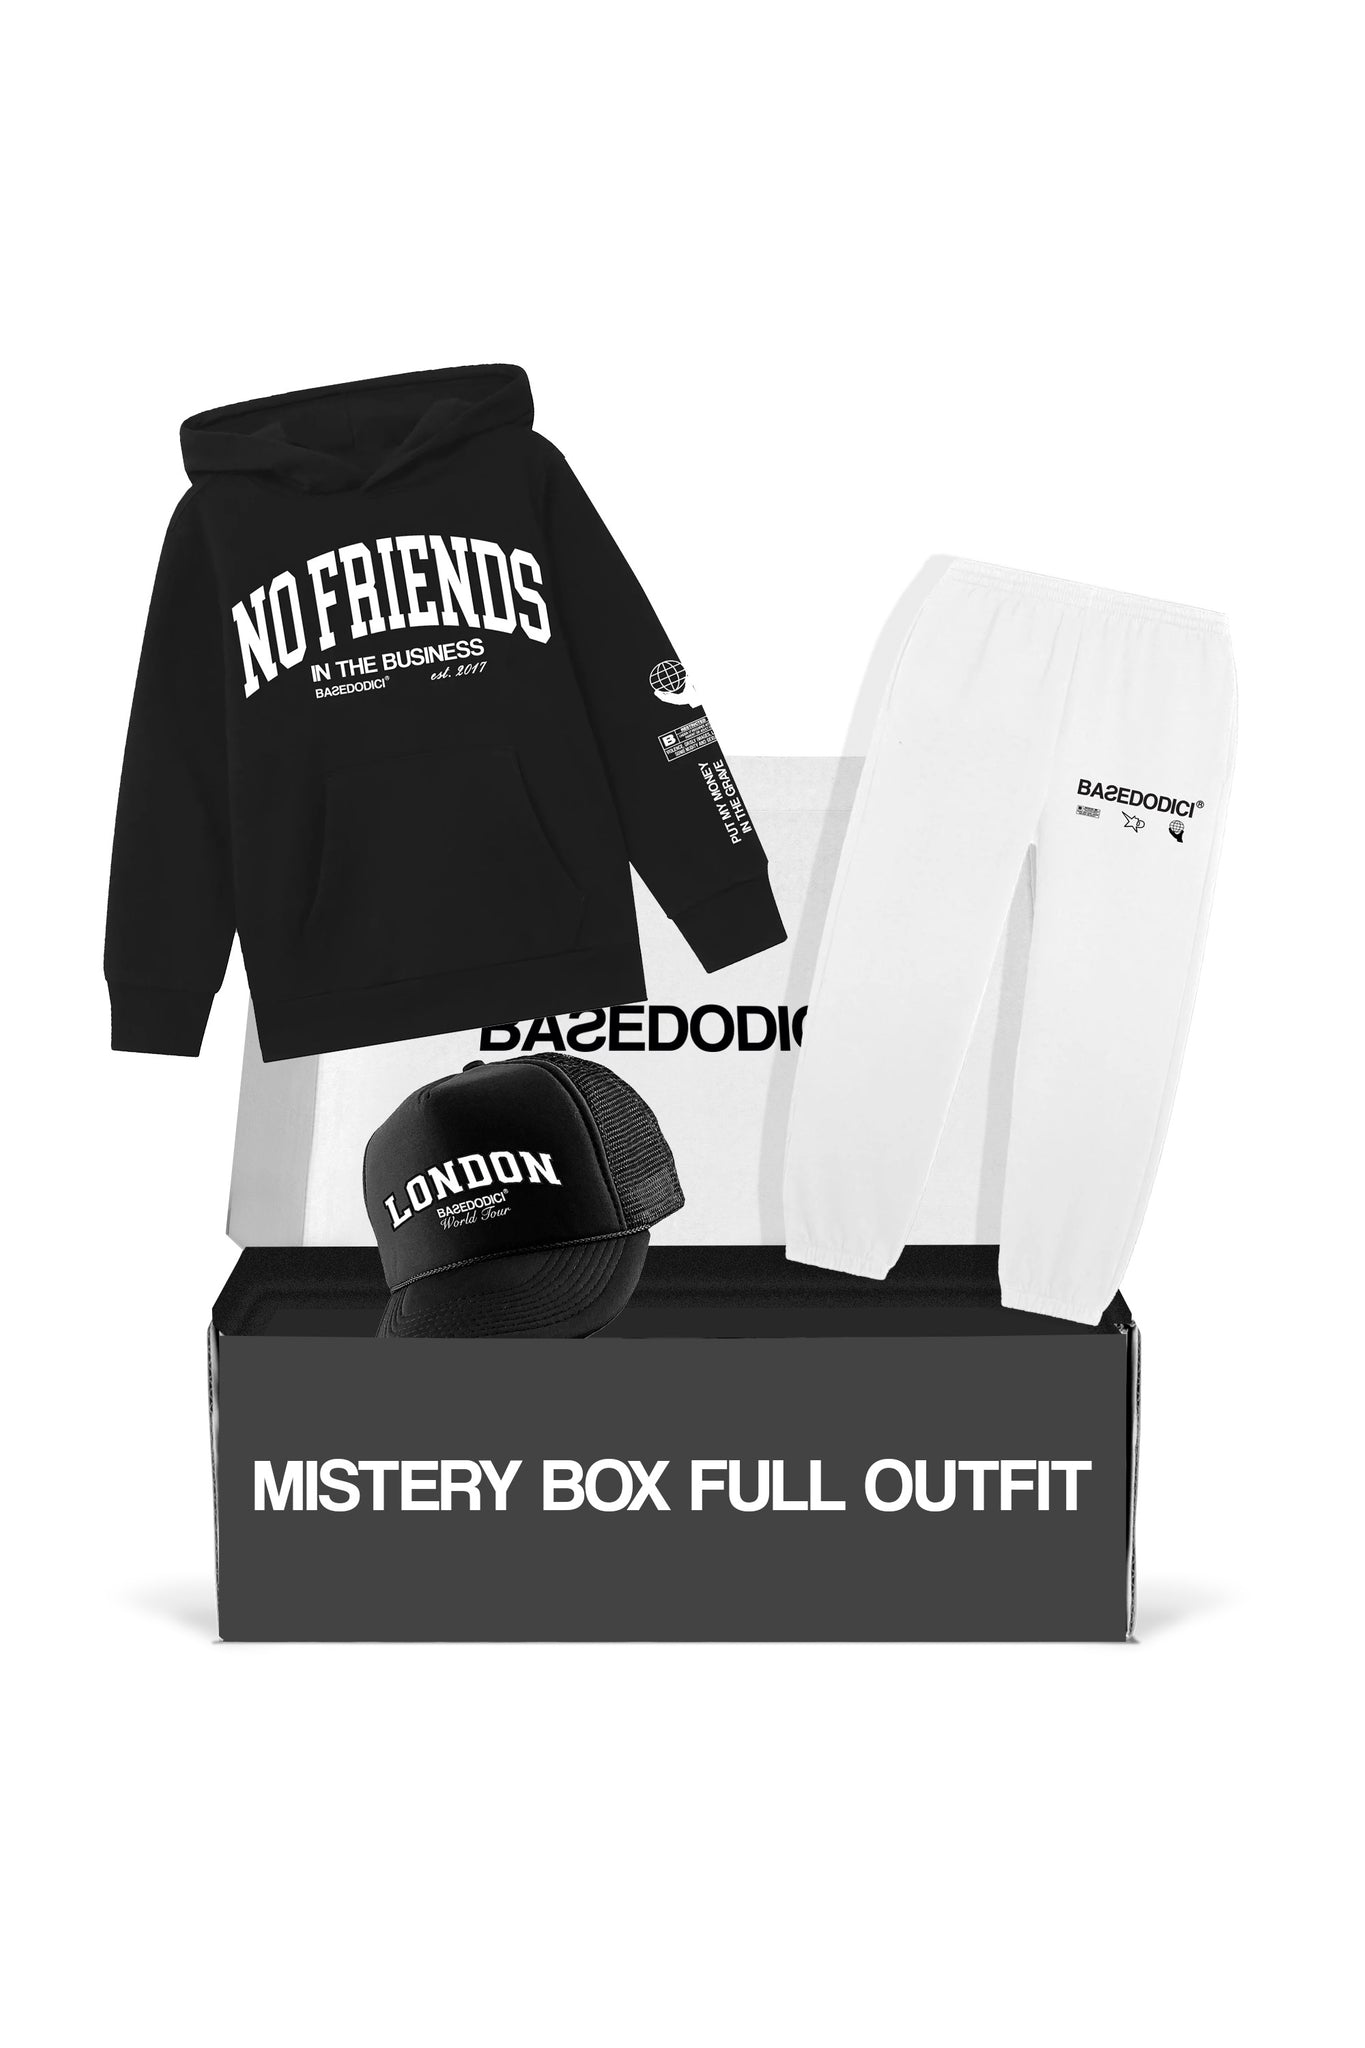 Mystery Box Full Outfit